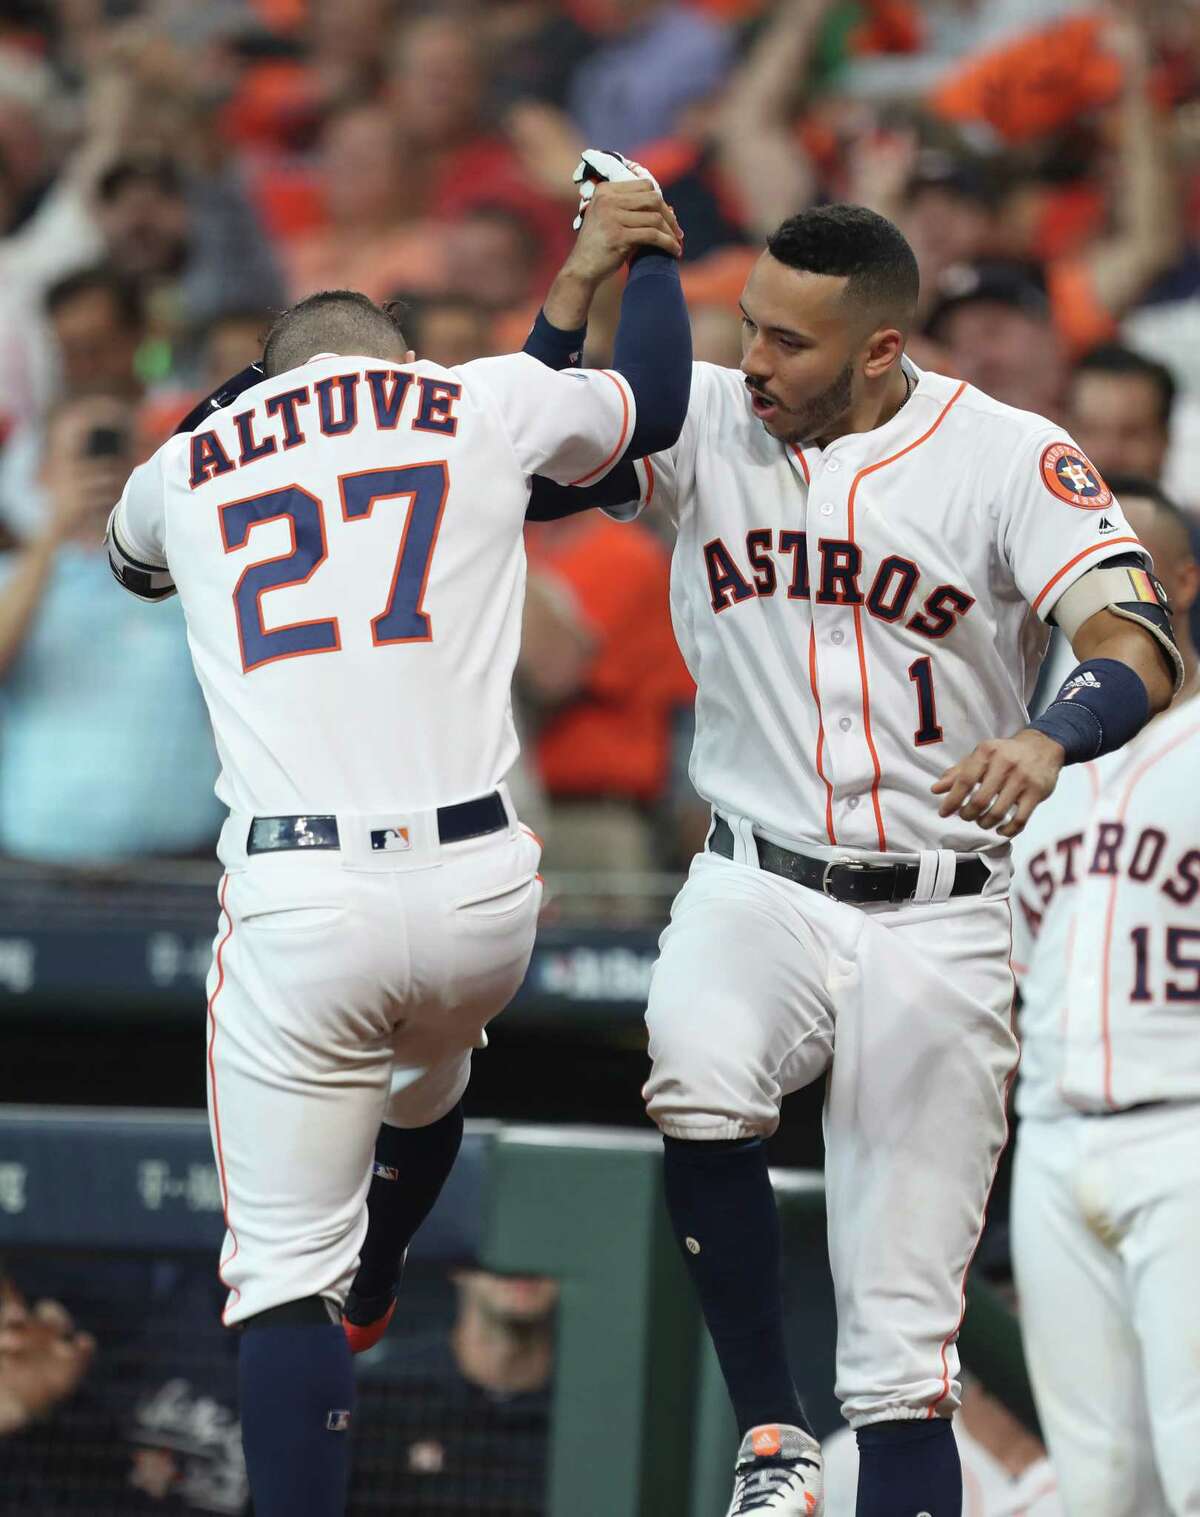 Houston Astros shortstop Carlos Correa (1) and Houston Astros second baseman Jose Altuve (27) celebrate in the fifth inning of Game 1 of the American League Division Series at Minute Maid Park on Friday, Oct. 5, 2018, in Houston.